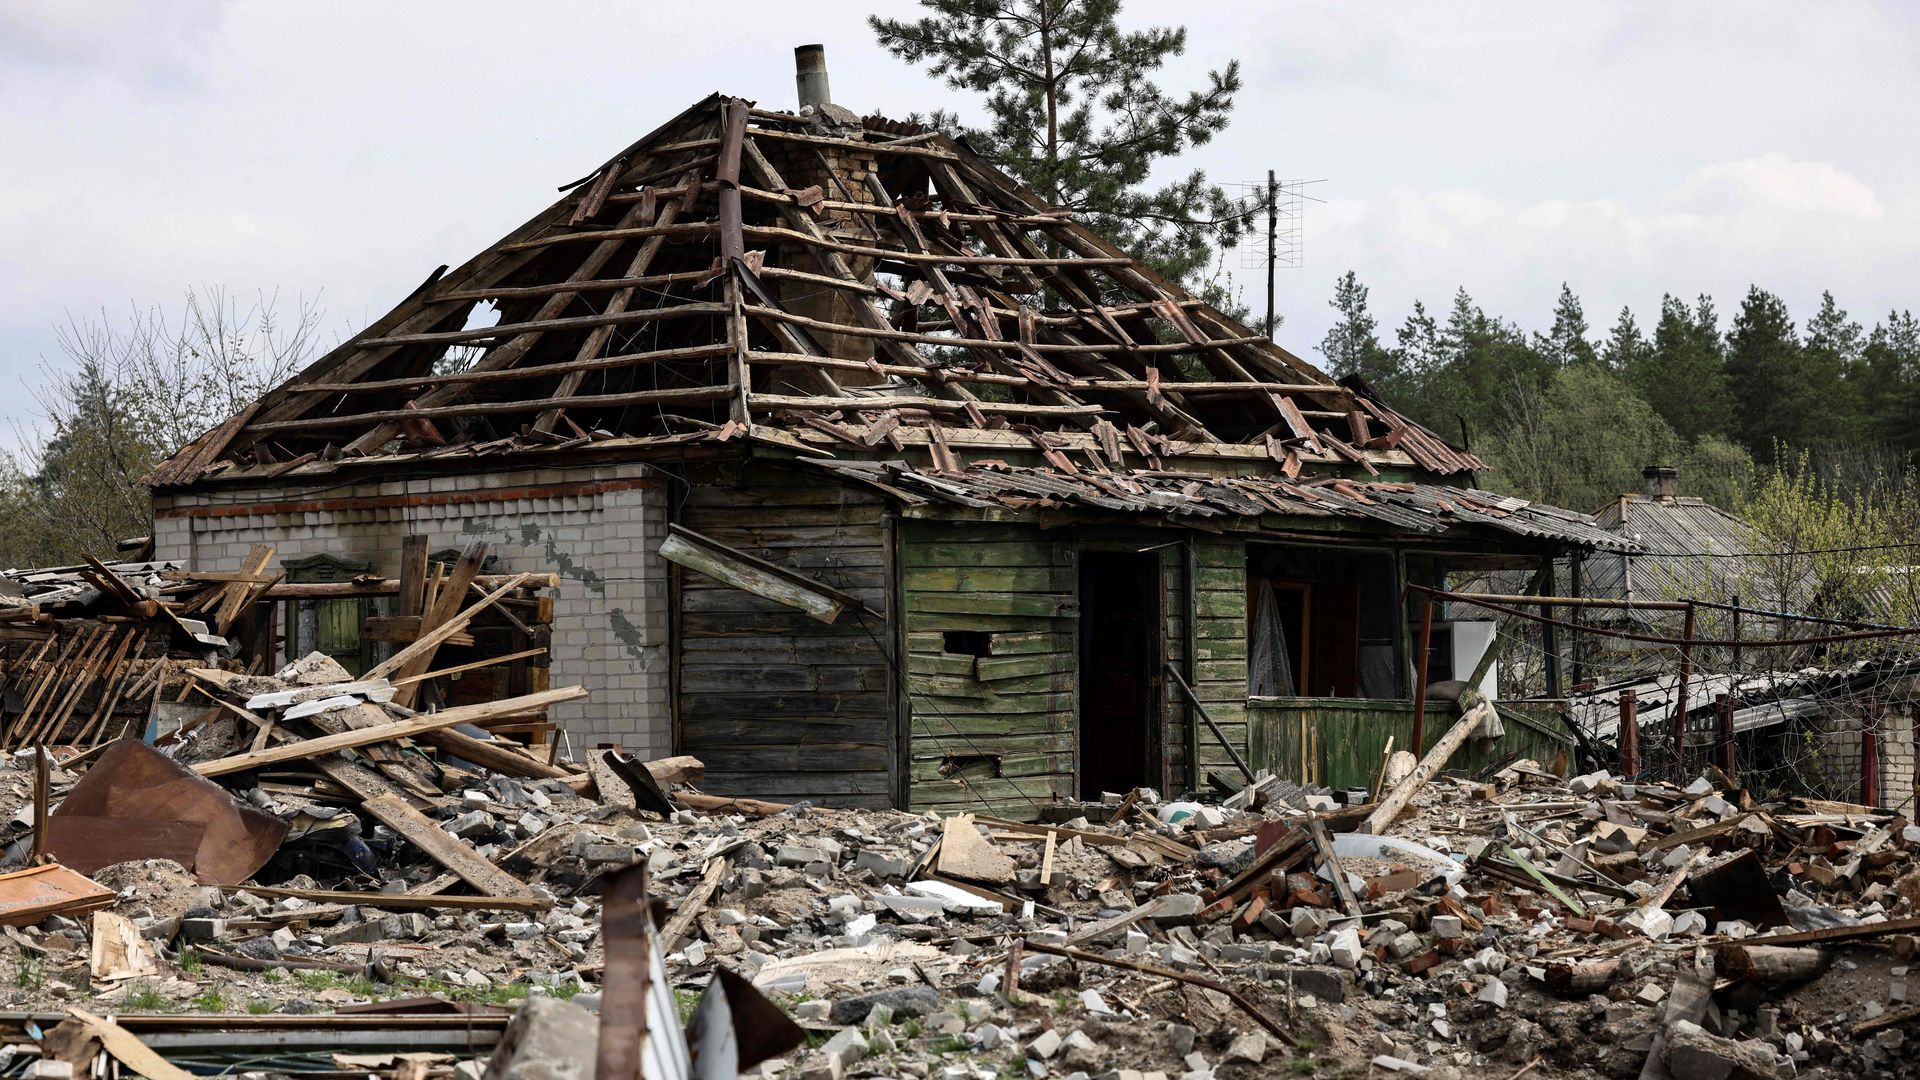 A destroyed house in the village of Yatskivka in the Donbas region of Ukraine on April 16.